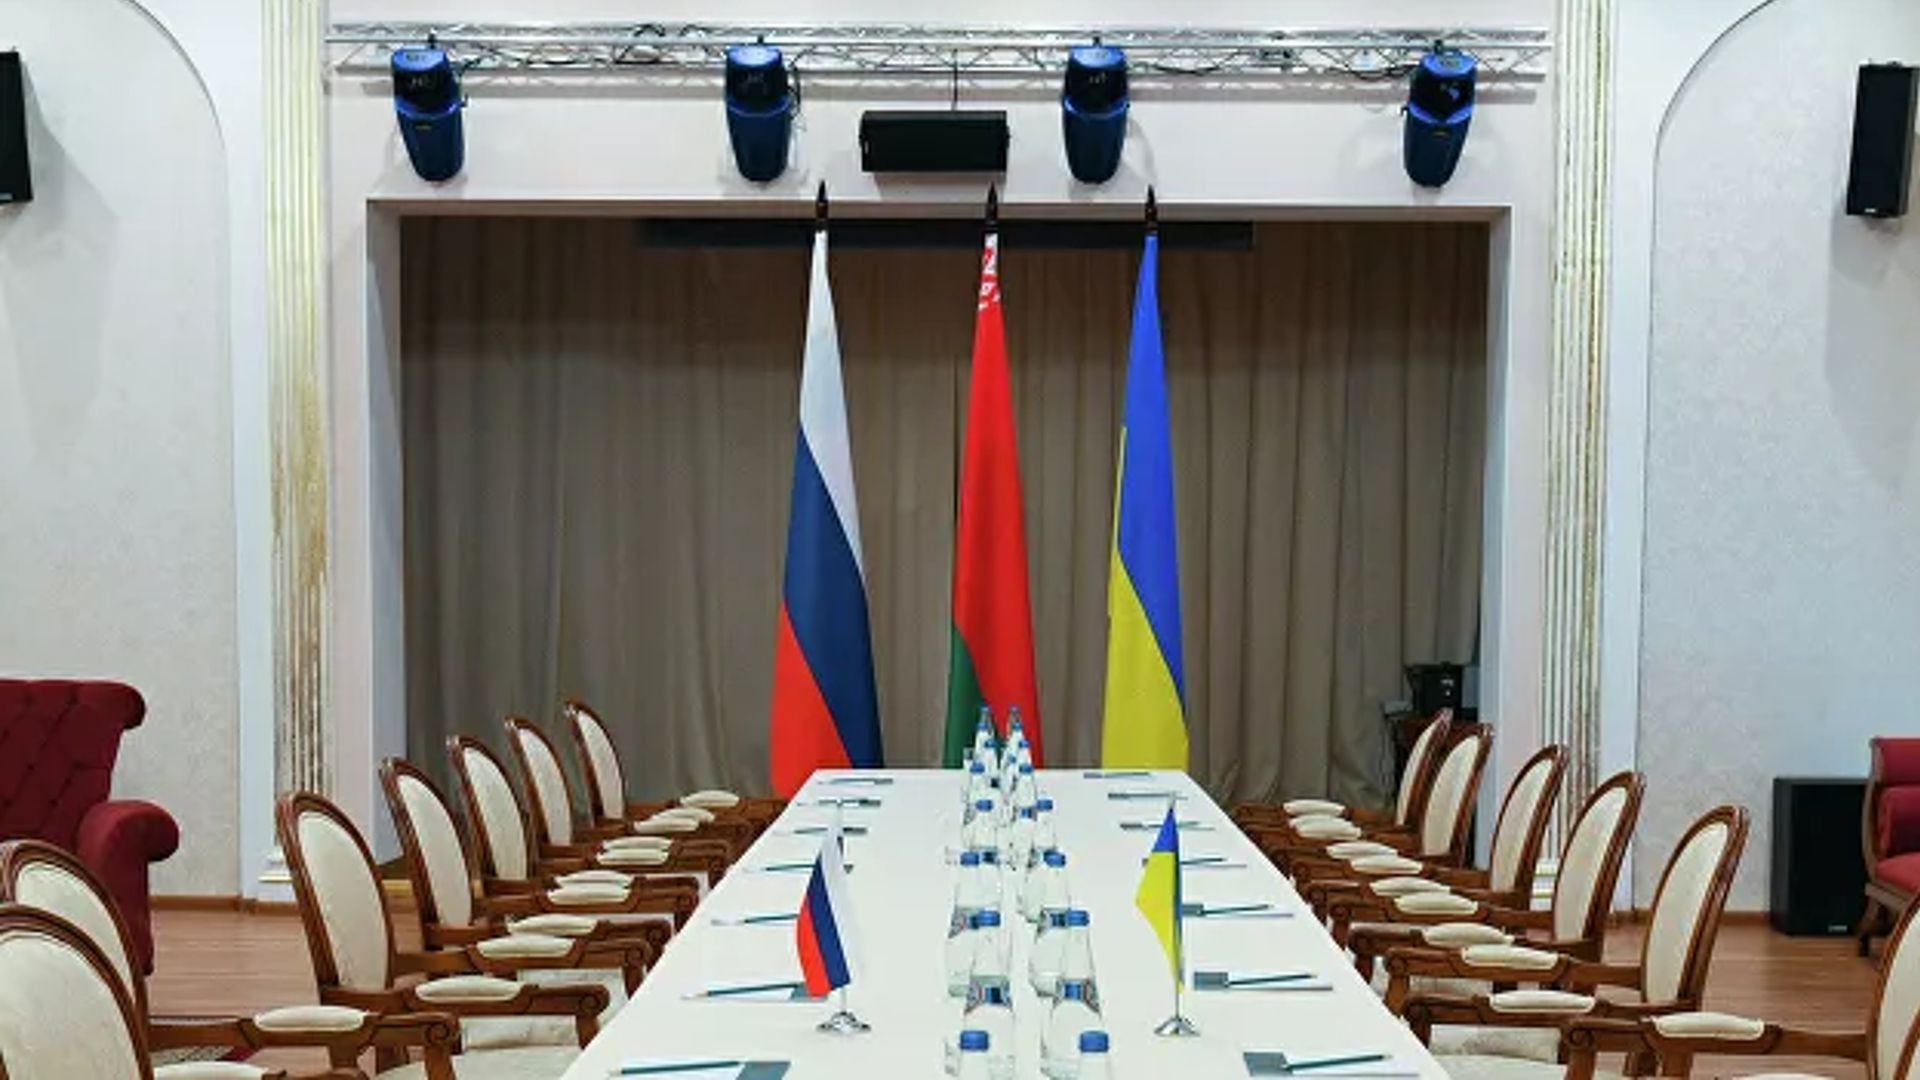 The Ukraine announced the second round of talks with Russia